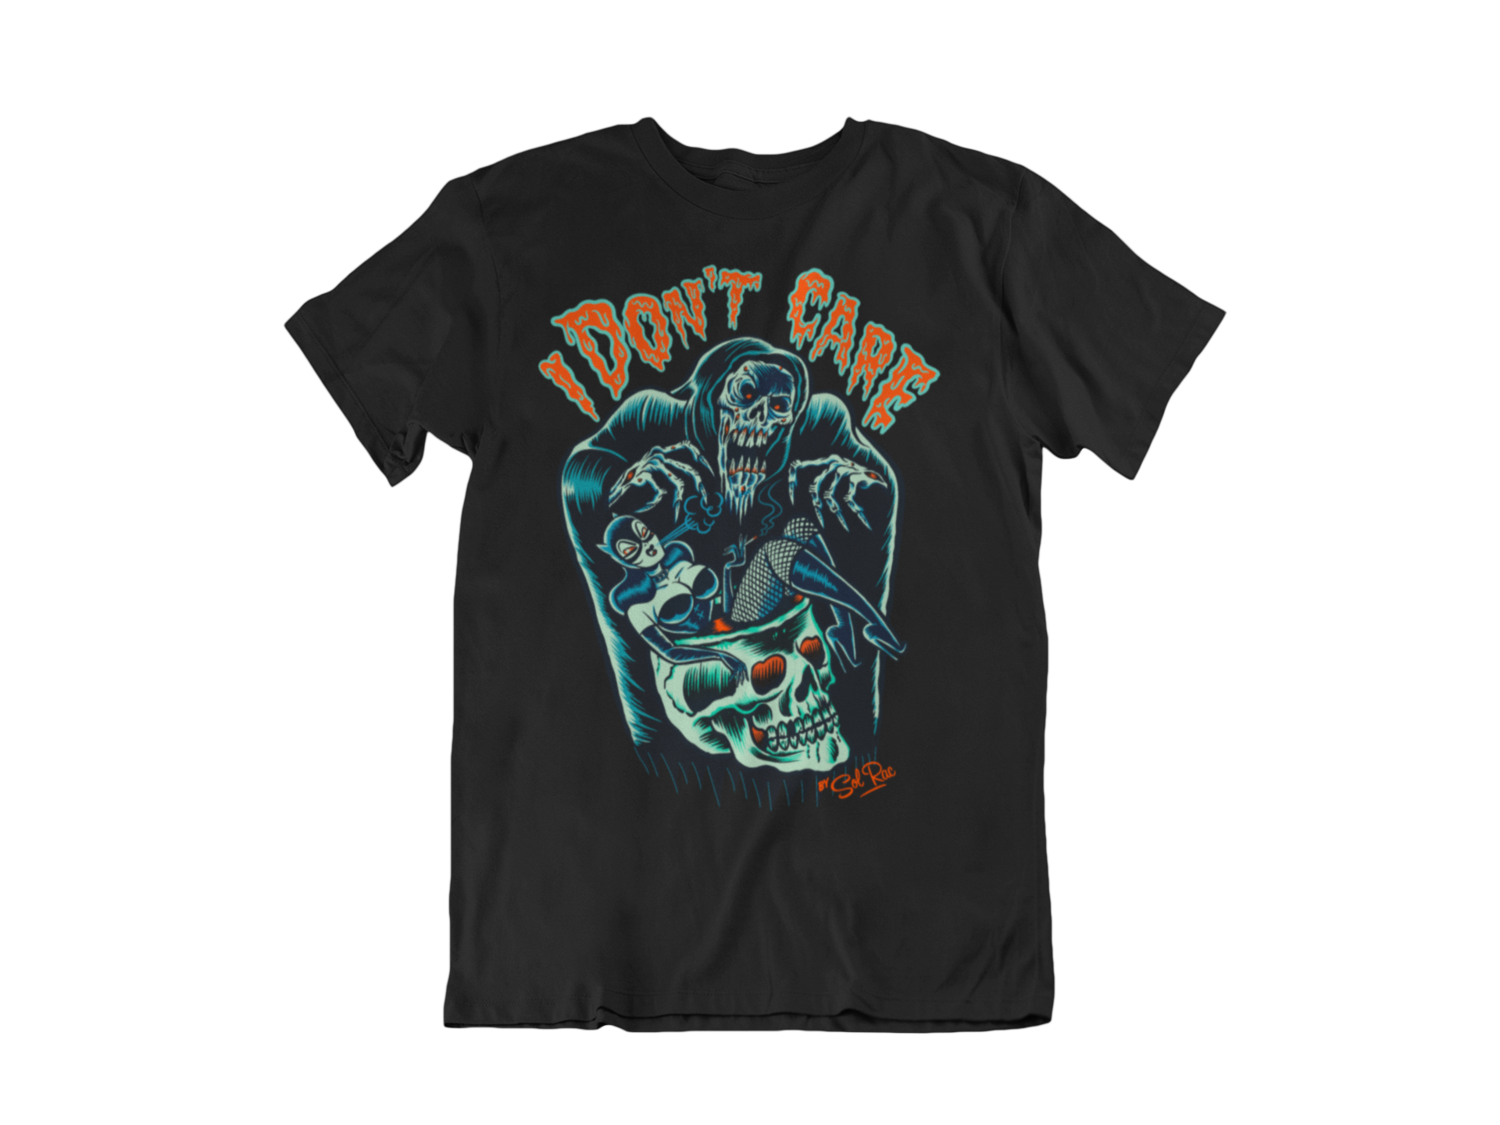 I DON´T CARE T-SHIRT MAN BY SOL RAC